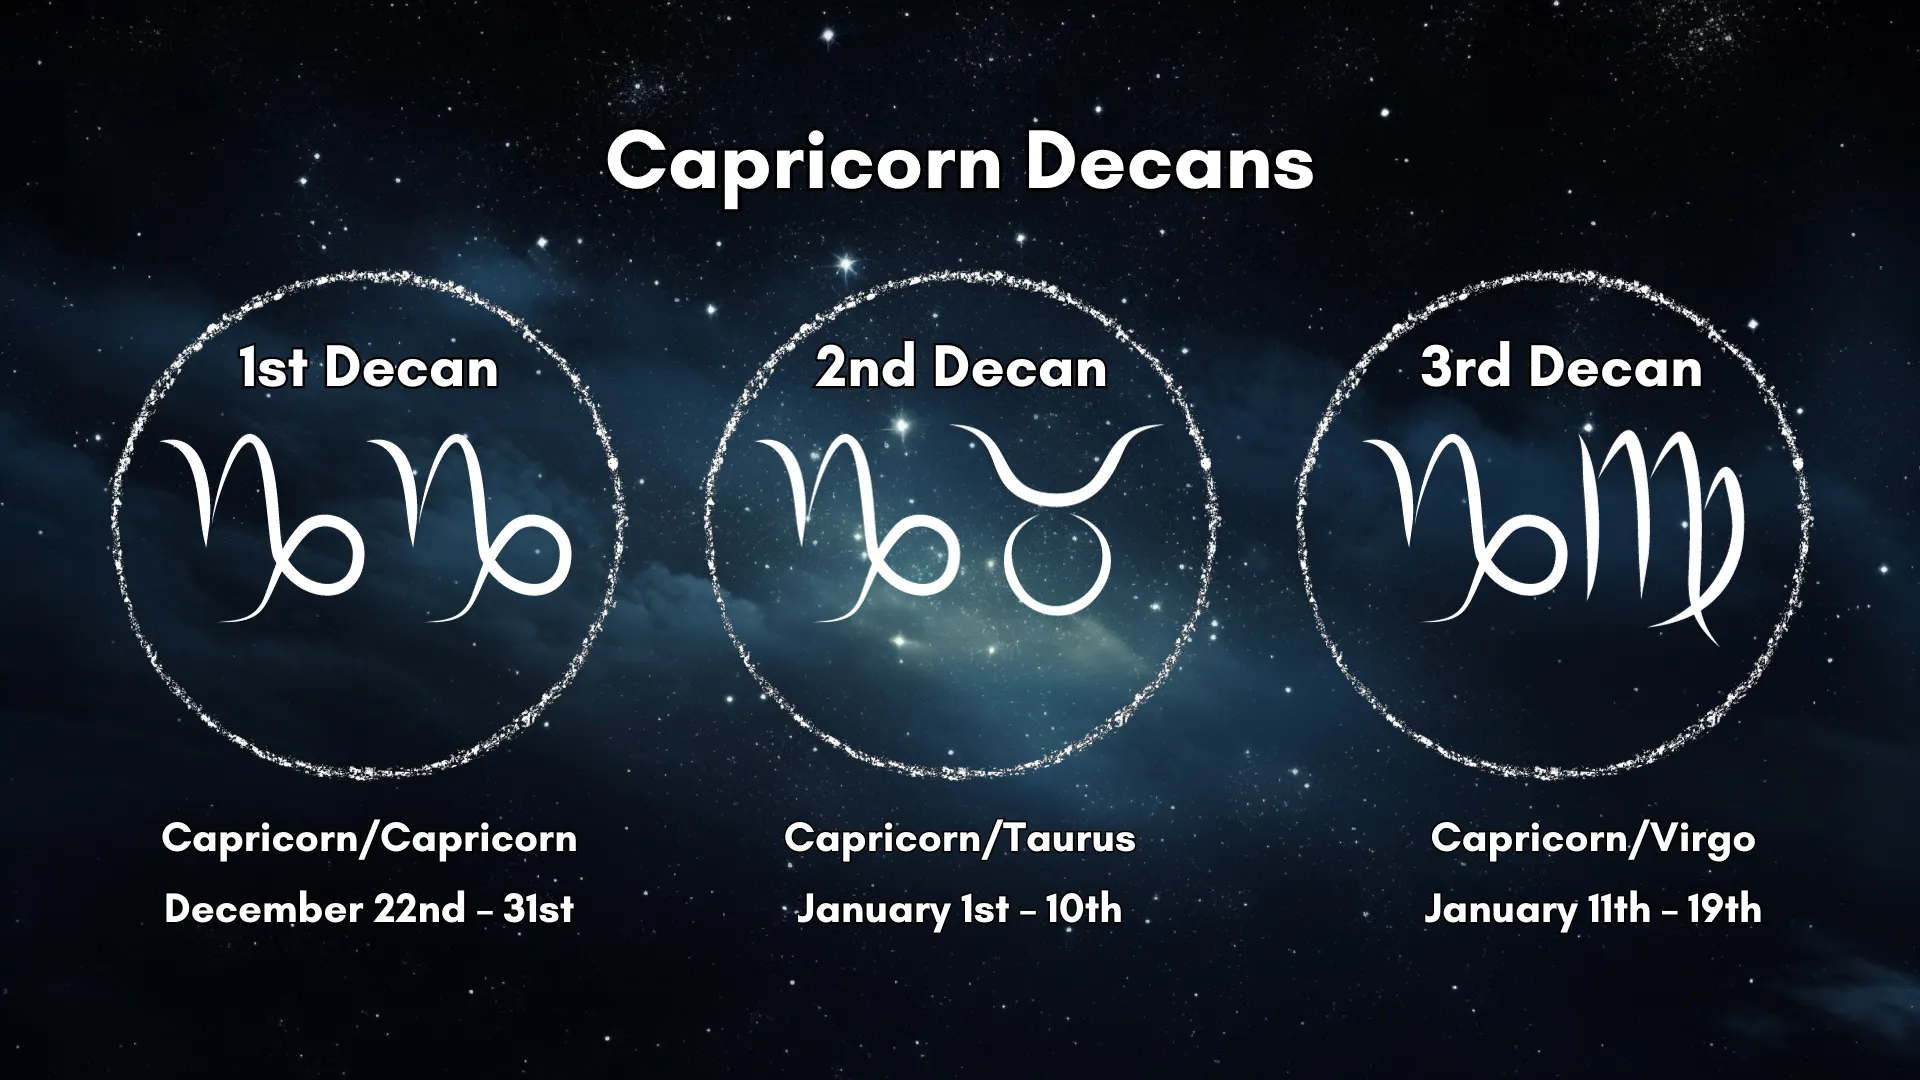 The Capricorn Decans are laid out in a chart that is easy to understand.